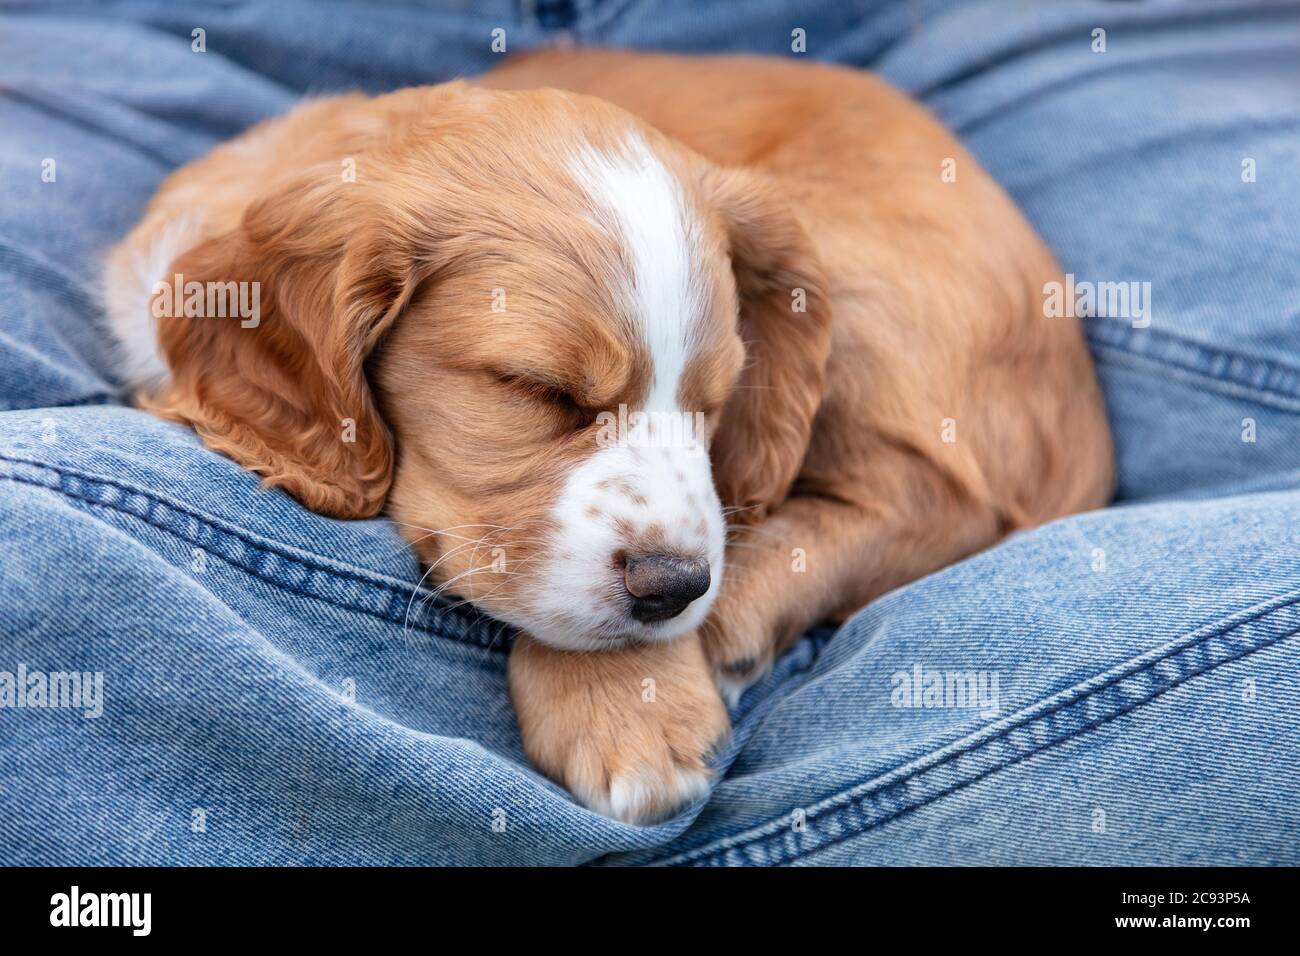 Cute light brown Spaniel puppy dog sleeping on the lap of a person wearing blue denim jeans Stock Photo